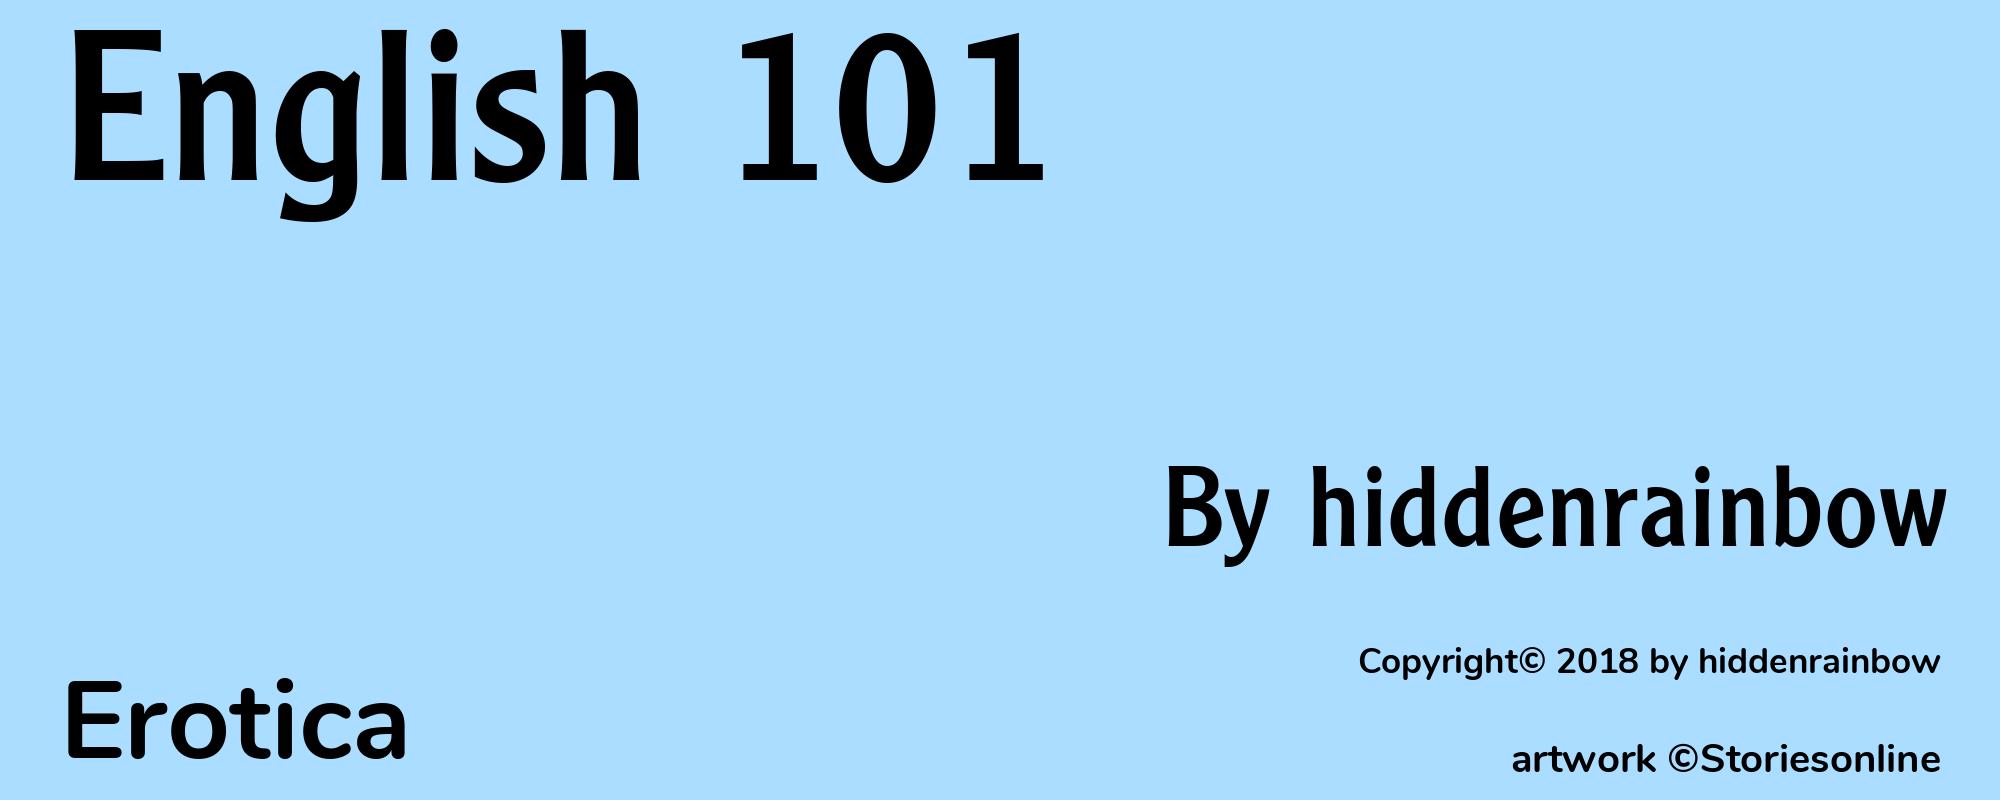 English 101 - Cover